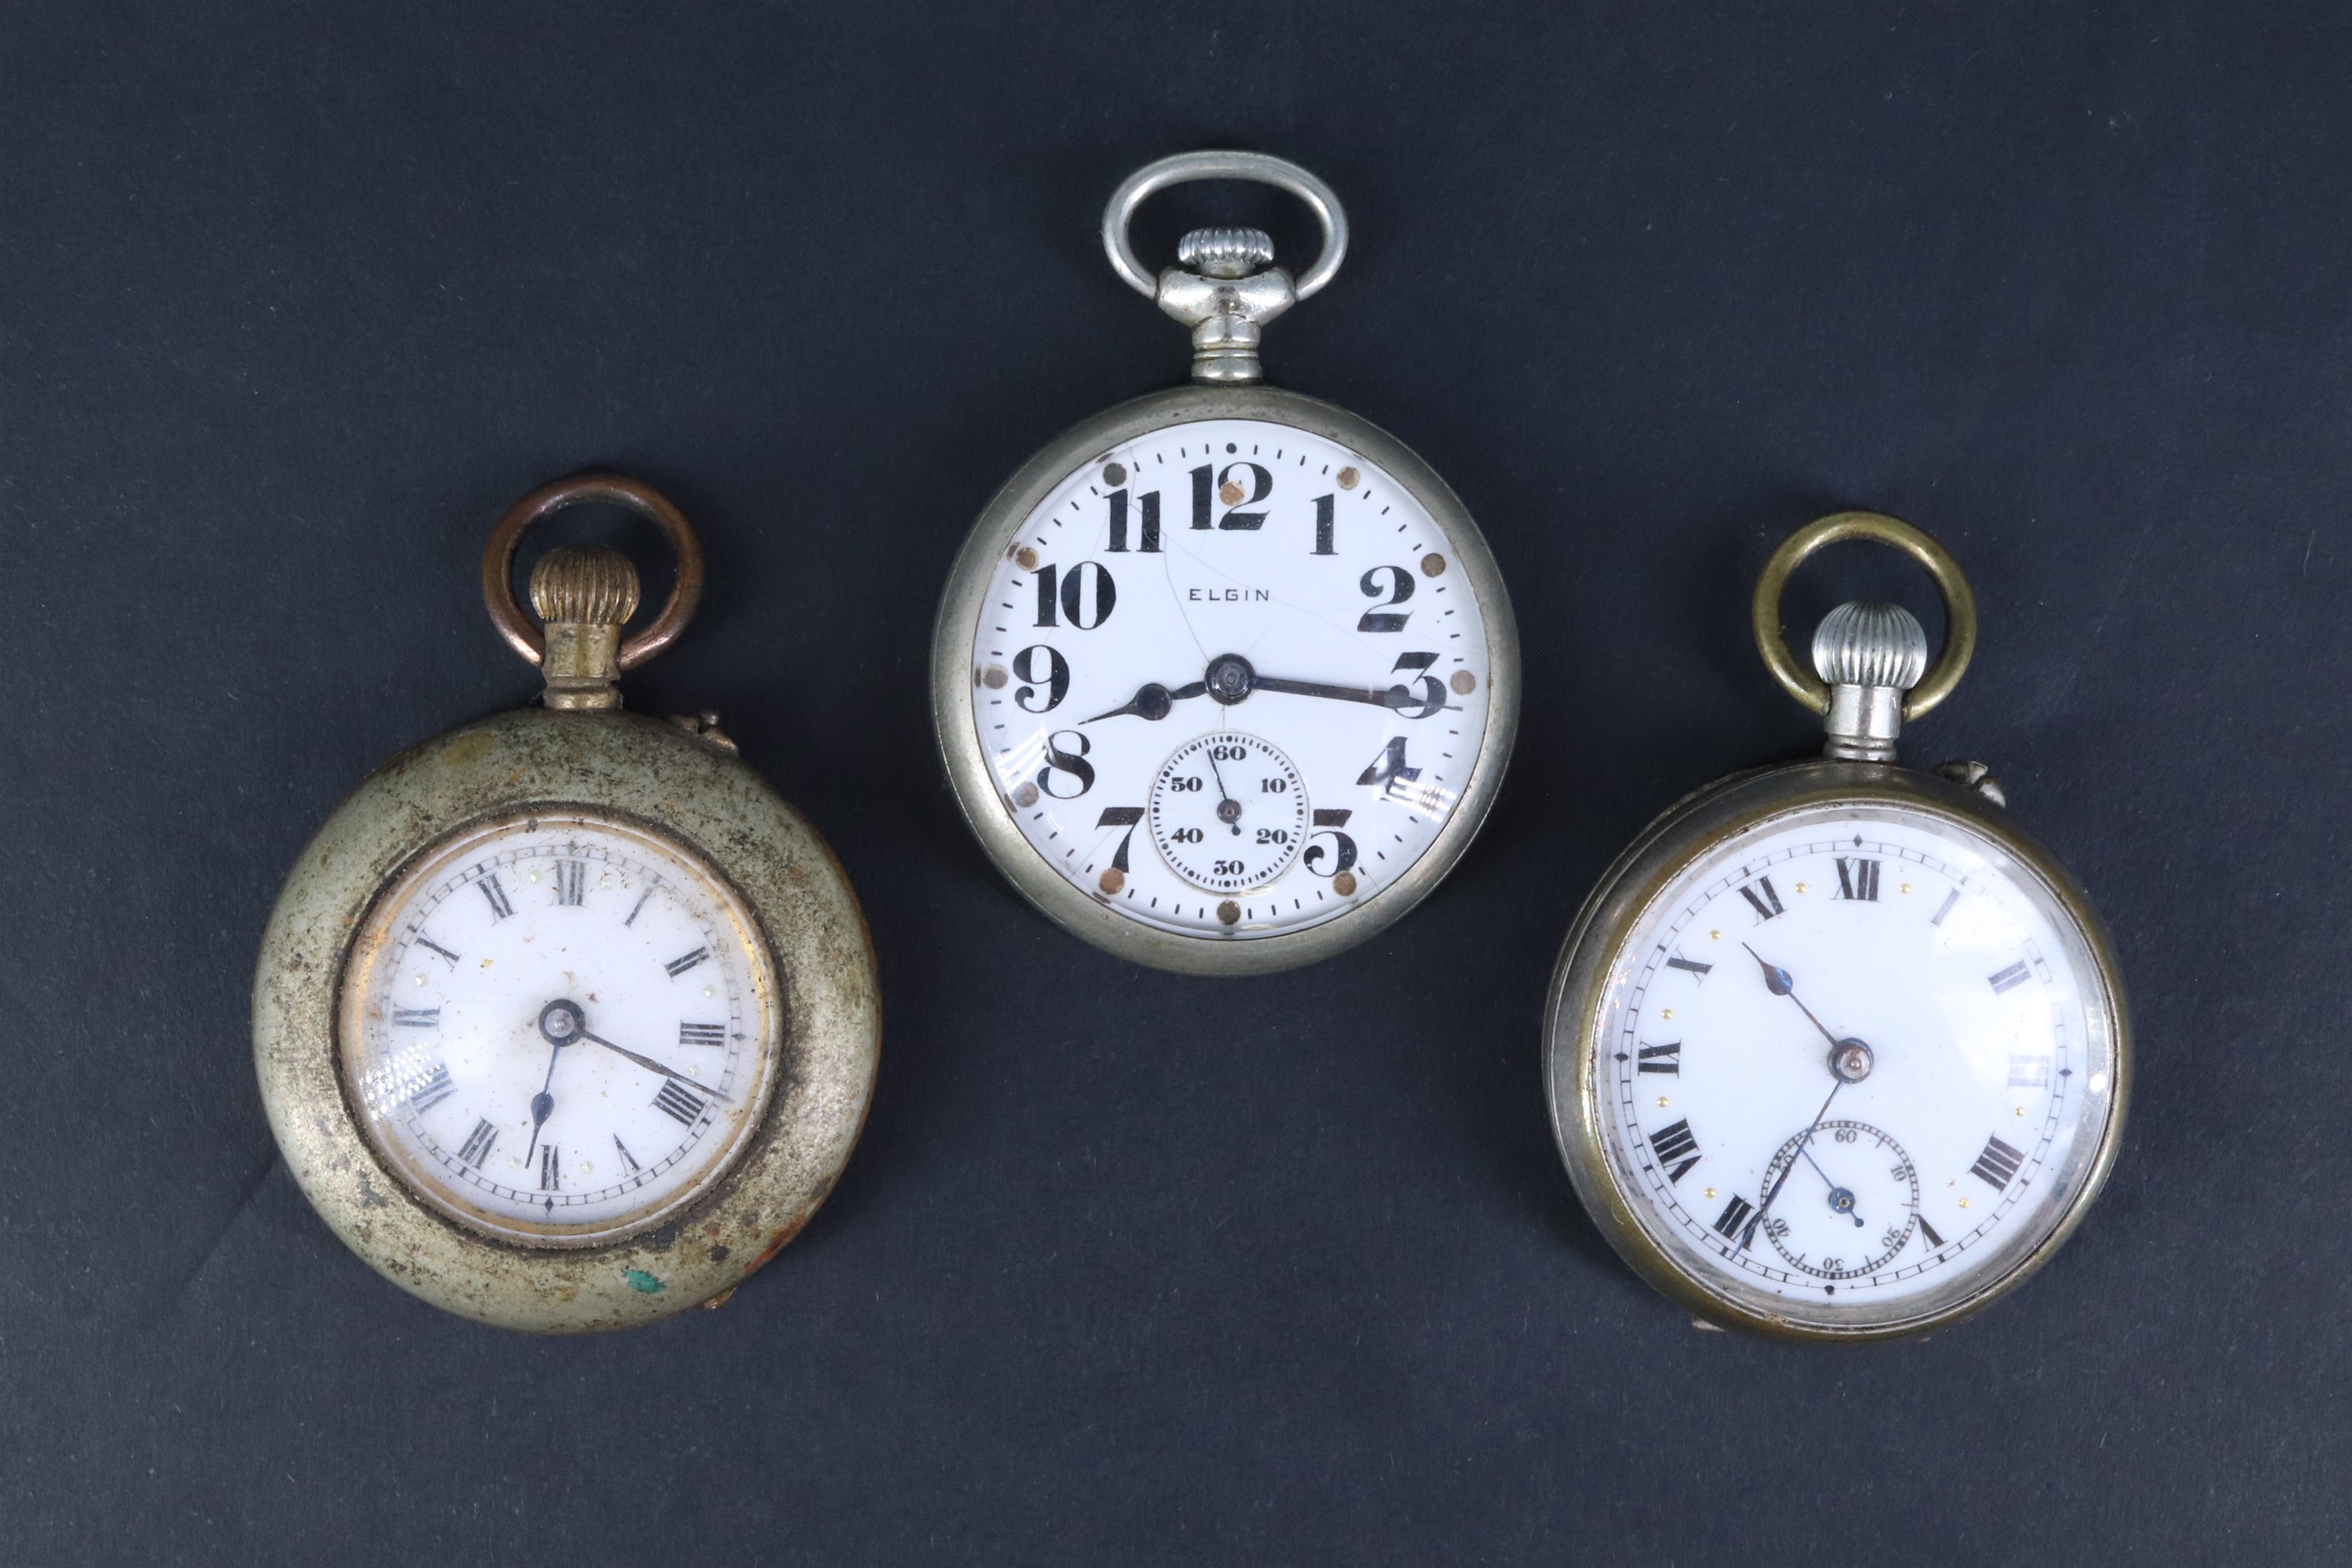 An early 20th Century Elgin nickel-cased crown-wound fob watch, 32 mm excluding stem and bow, (